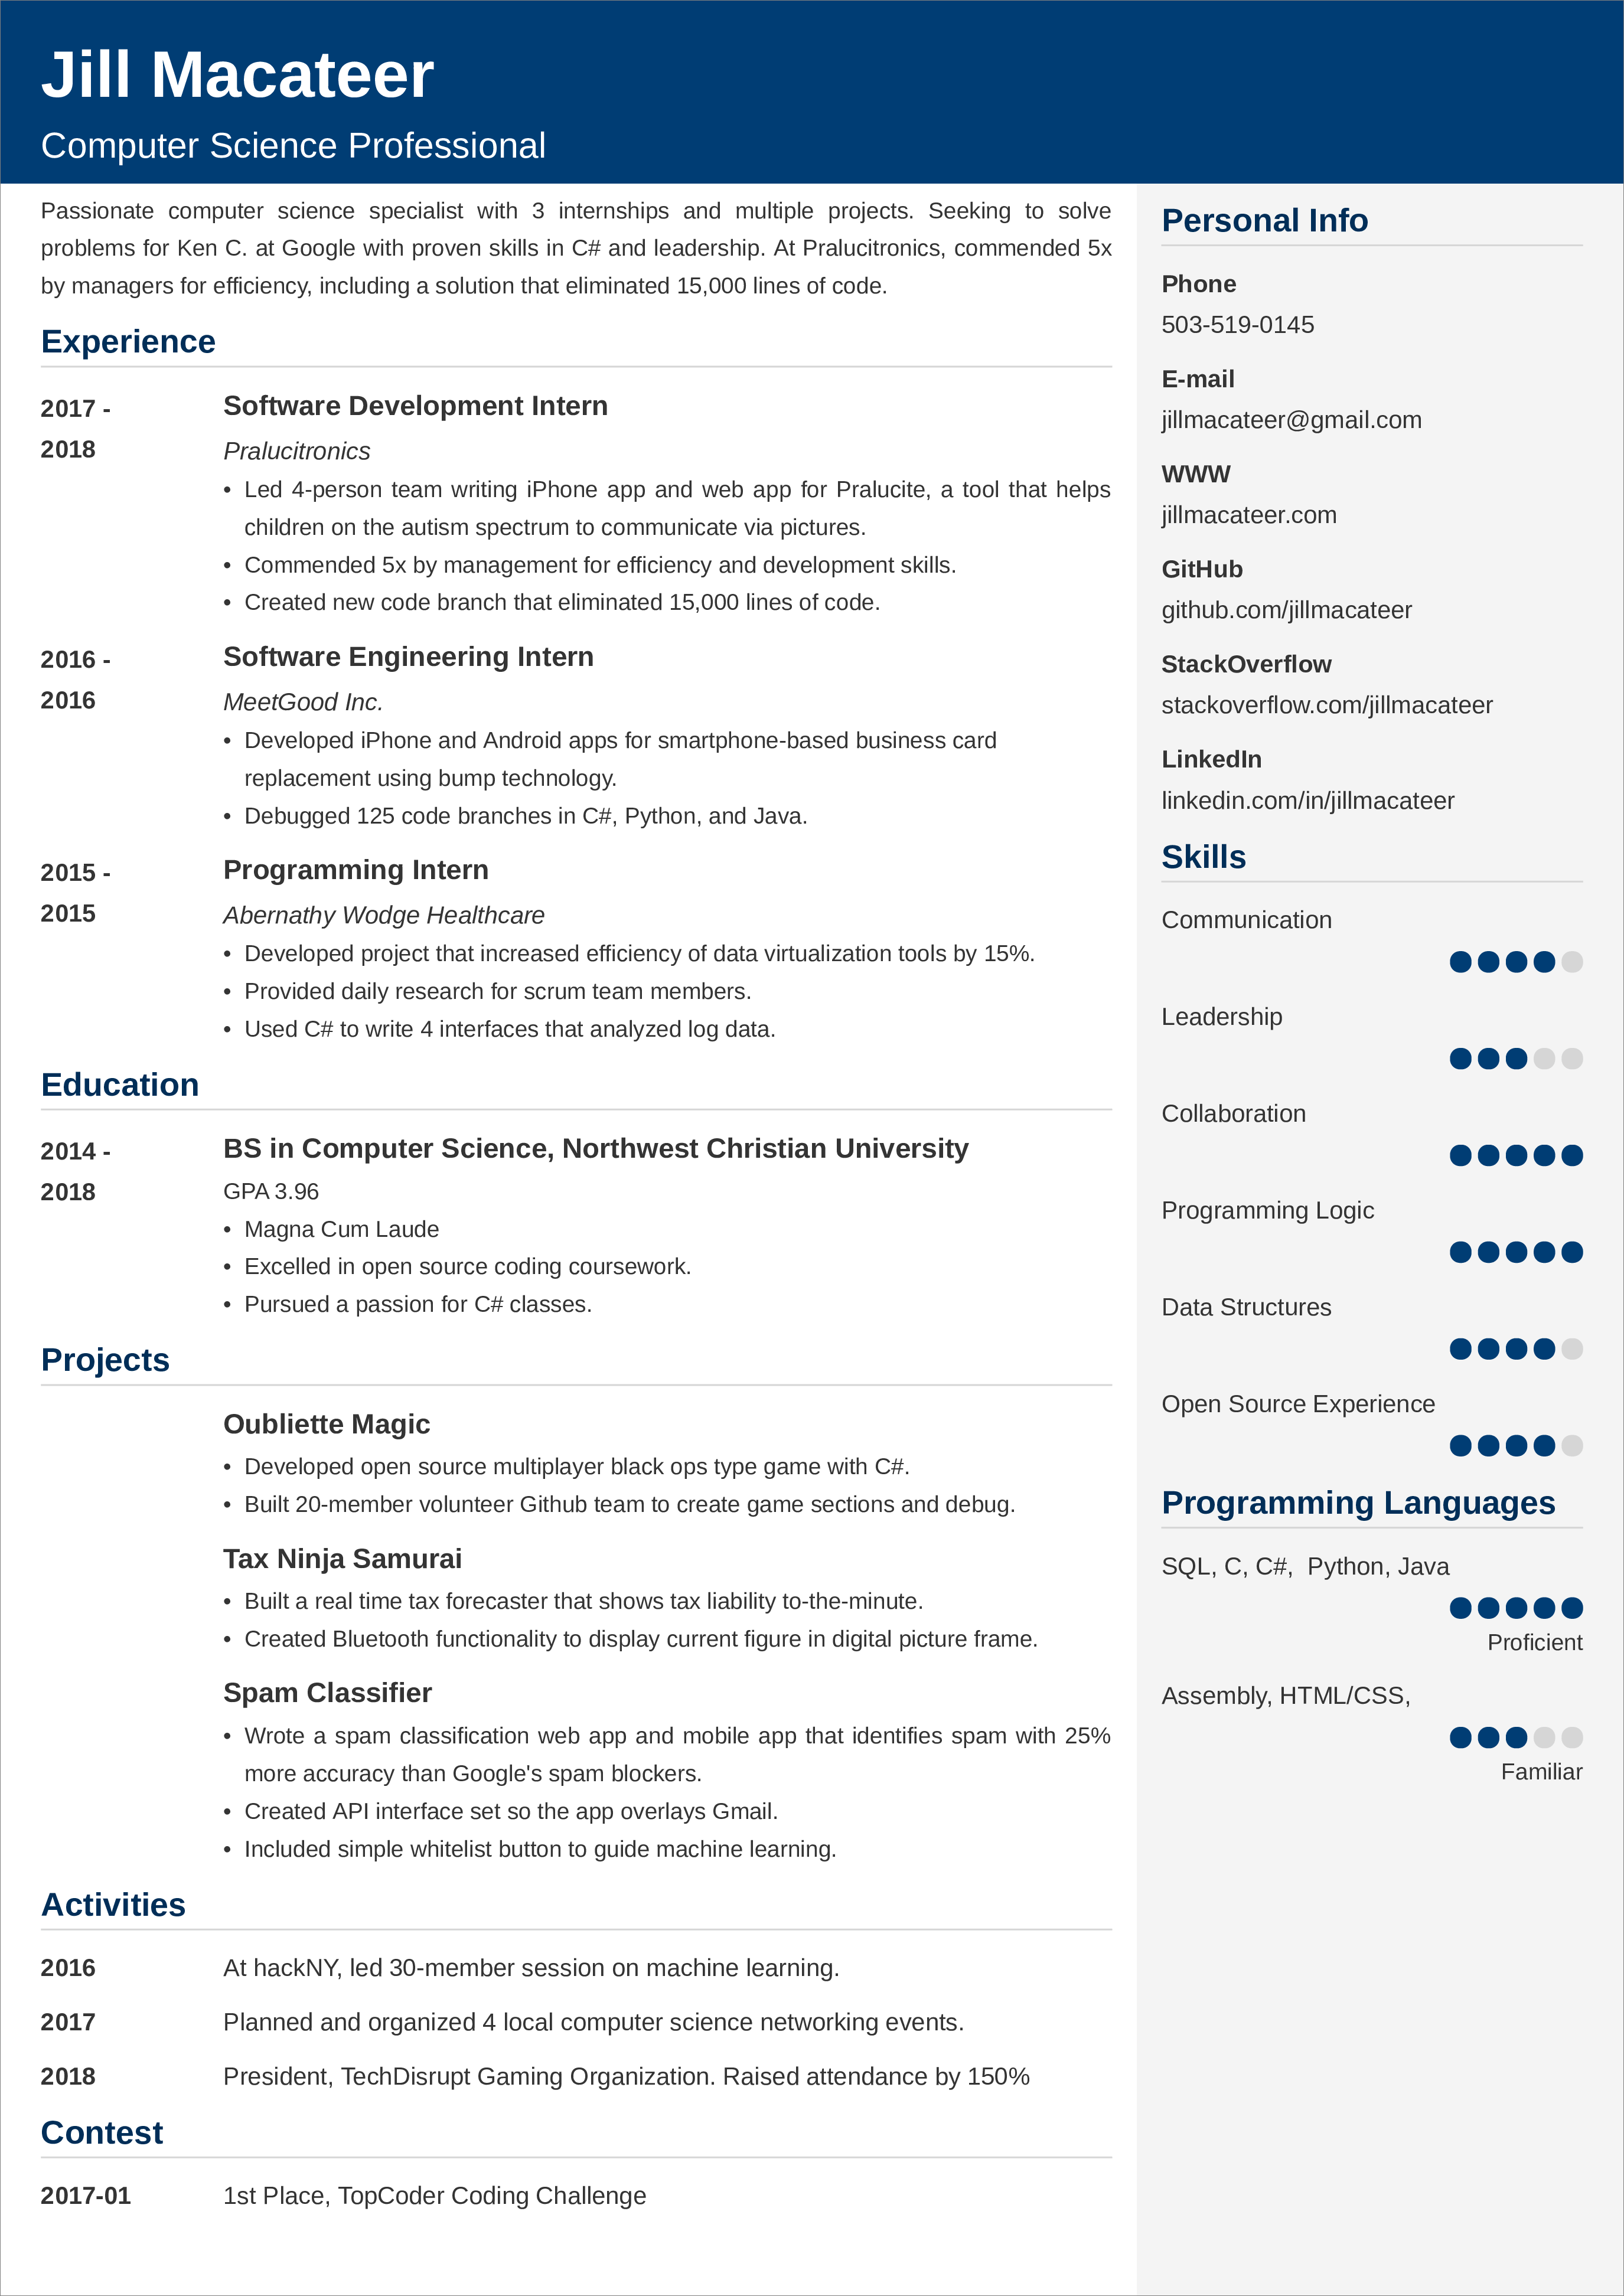 Additional coursework on resume computer science